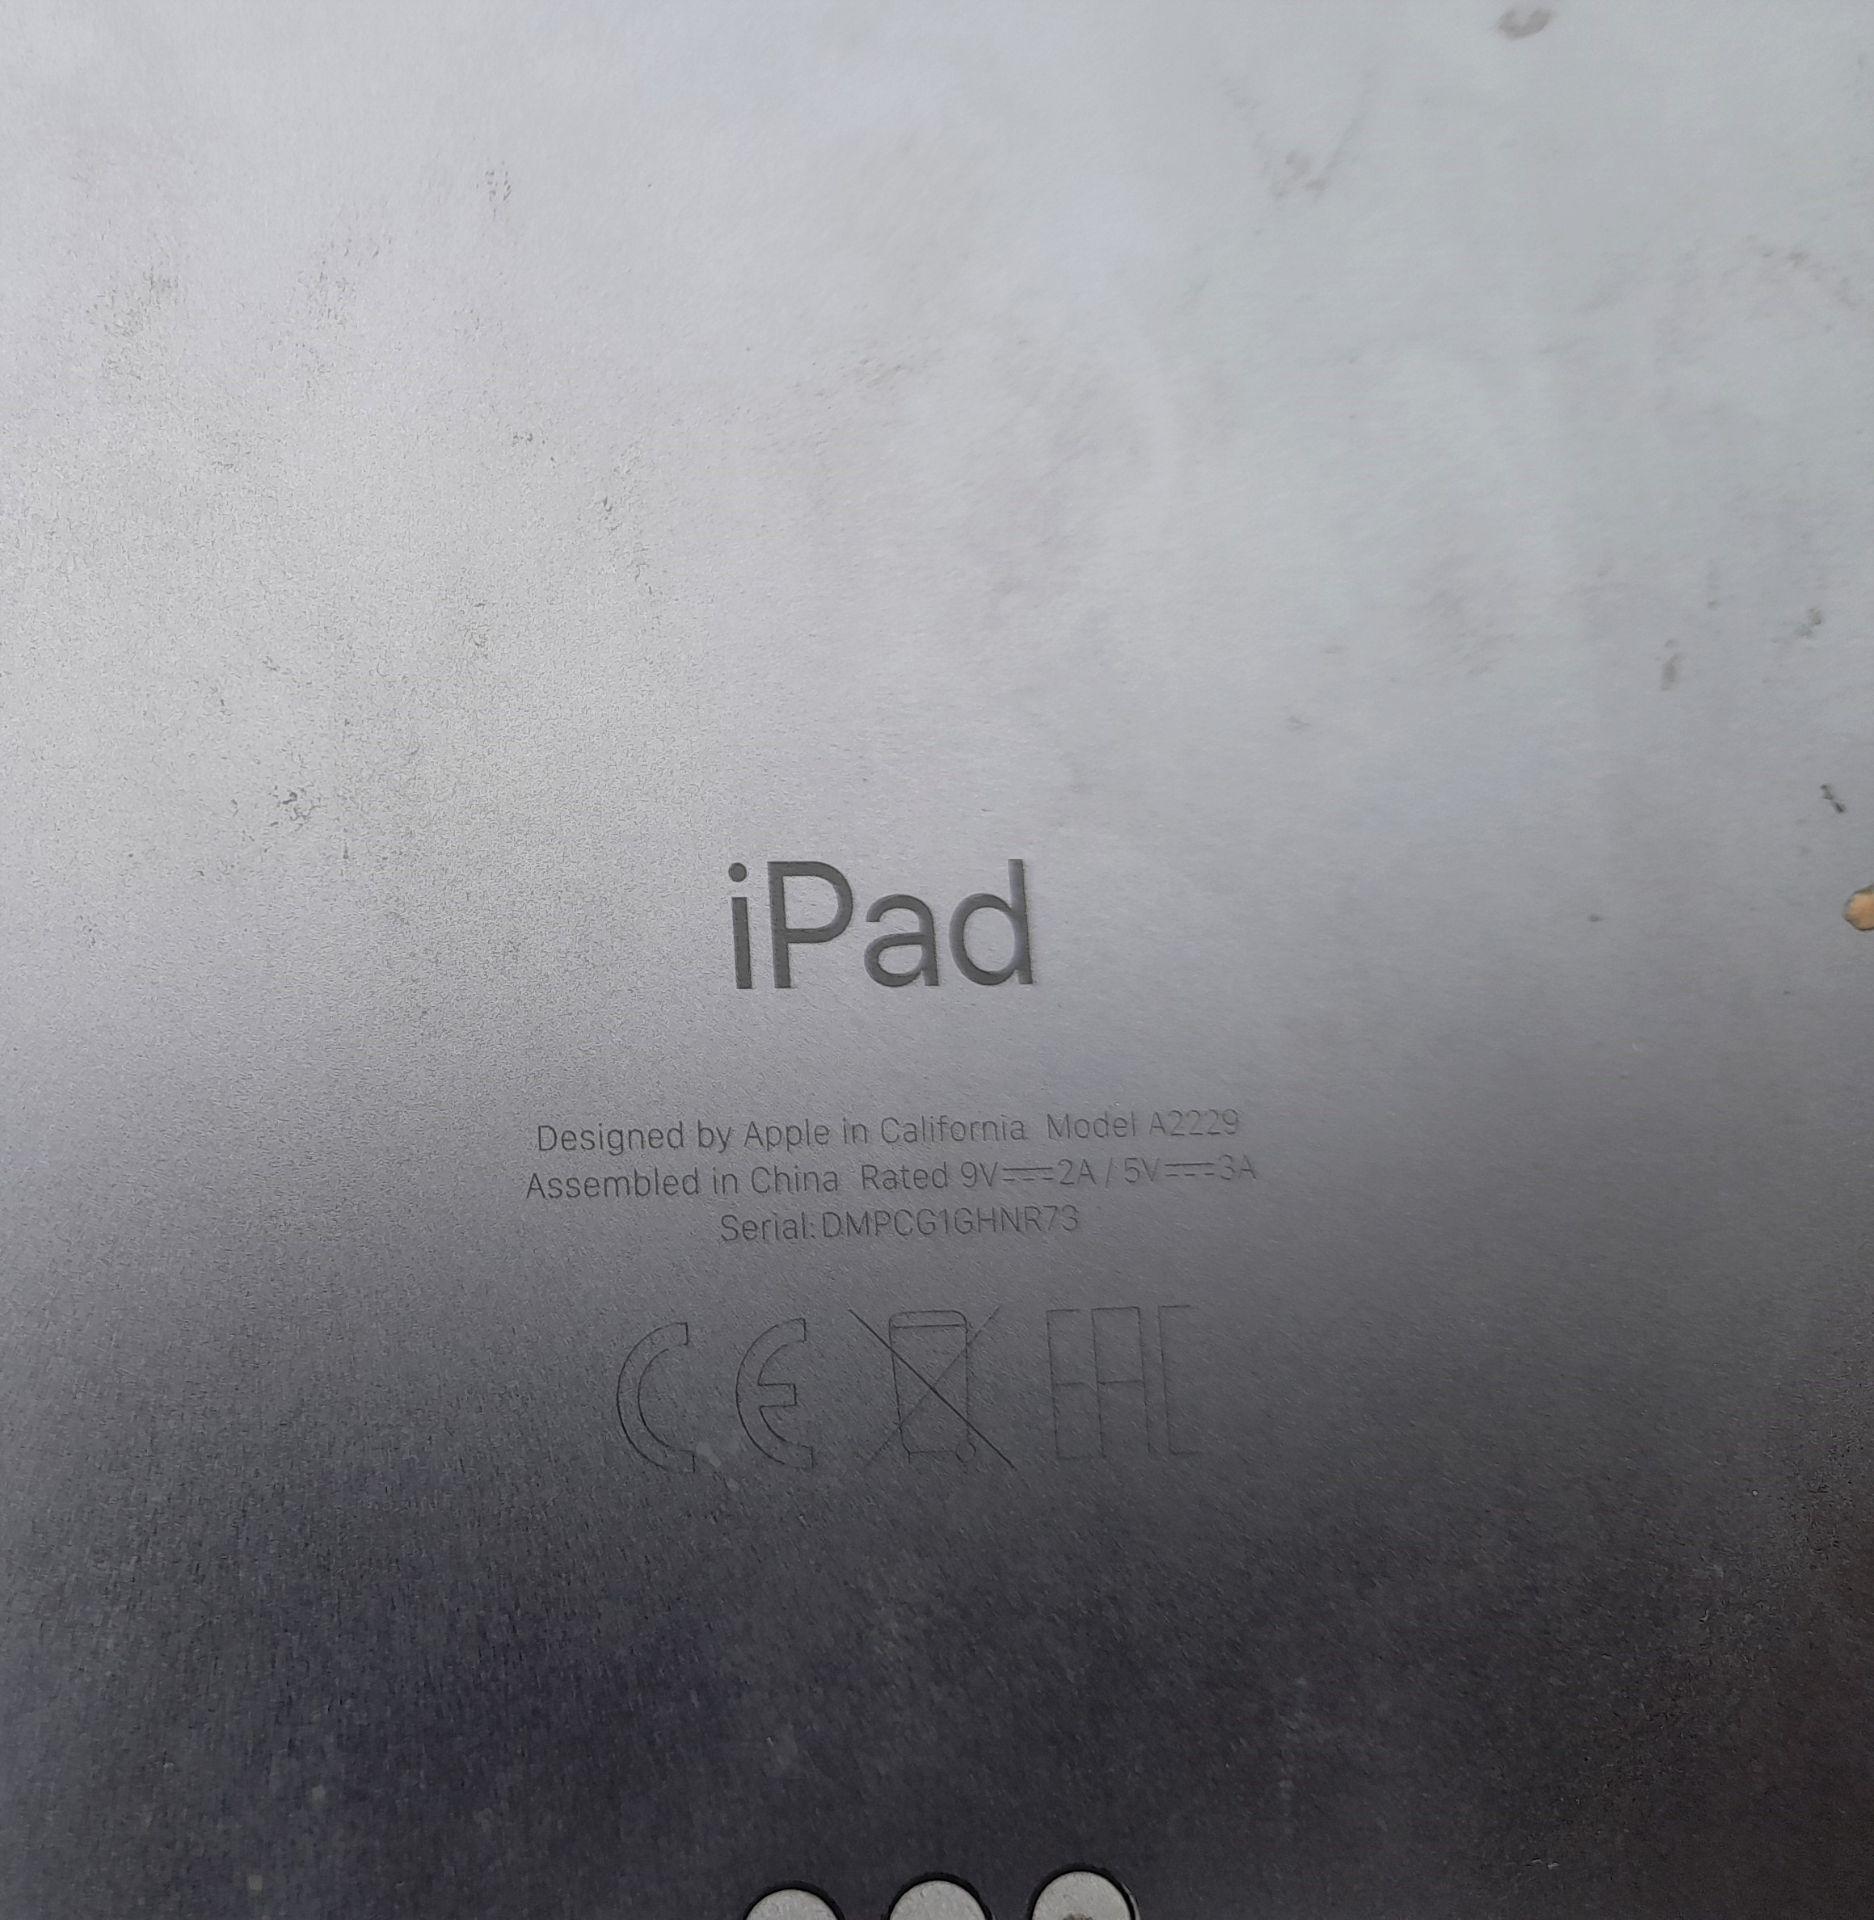 Apple iPad Pro 12.9” (4th Generation) Wi-Fi, Model A2229, with keyboard. No charger - Image 4 of 4